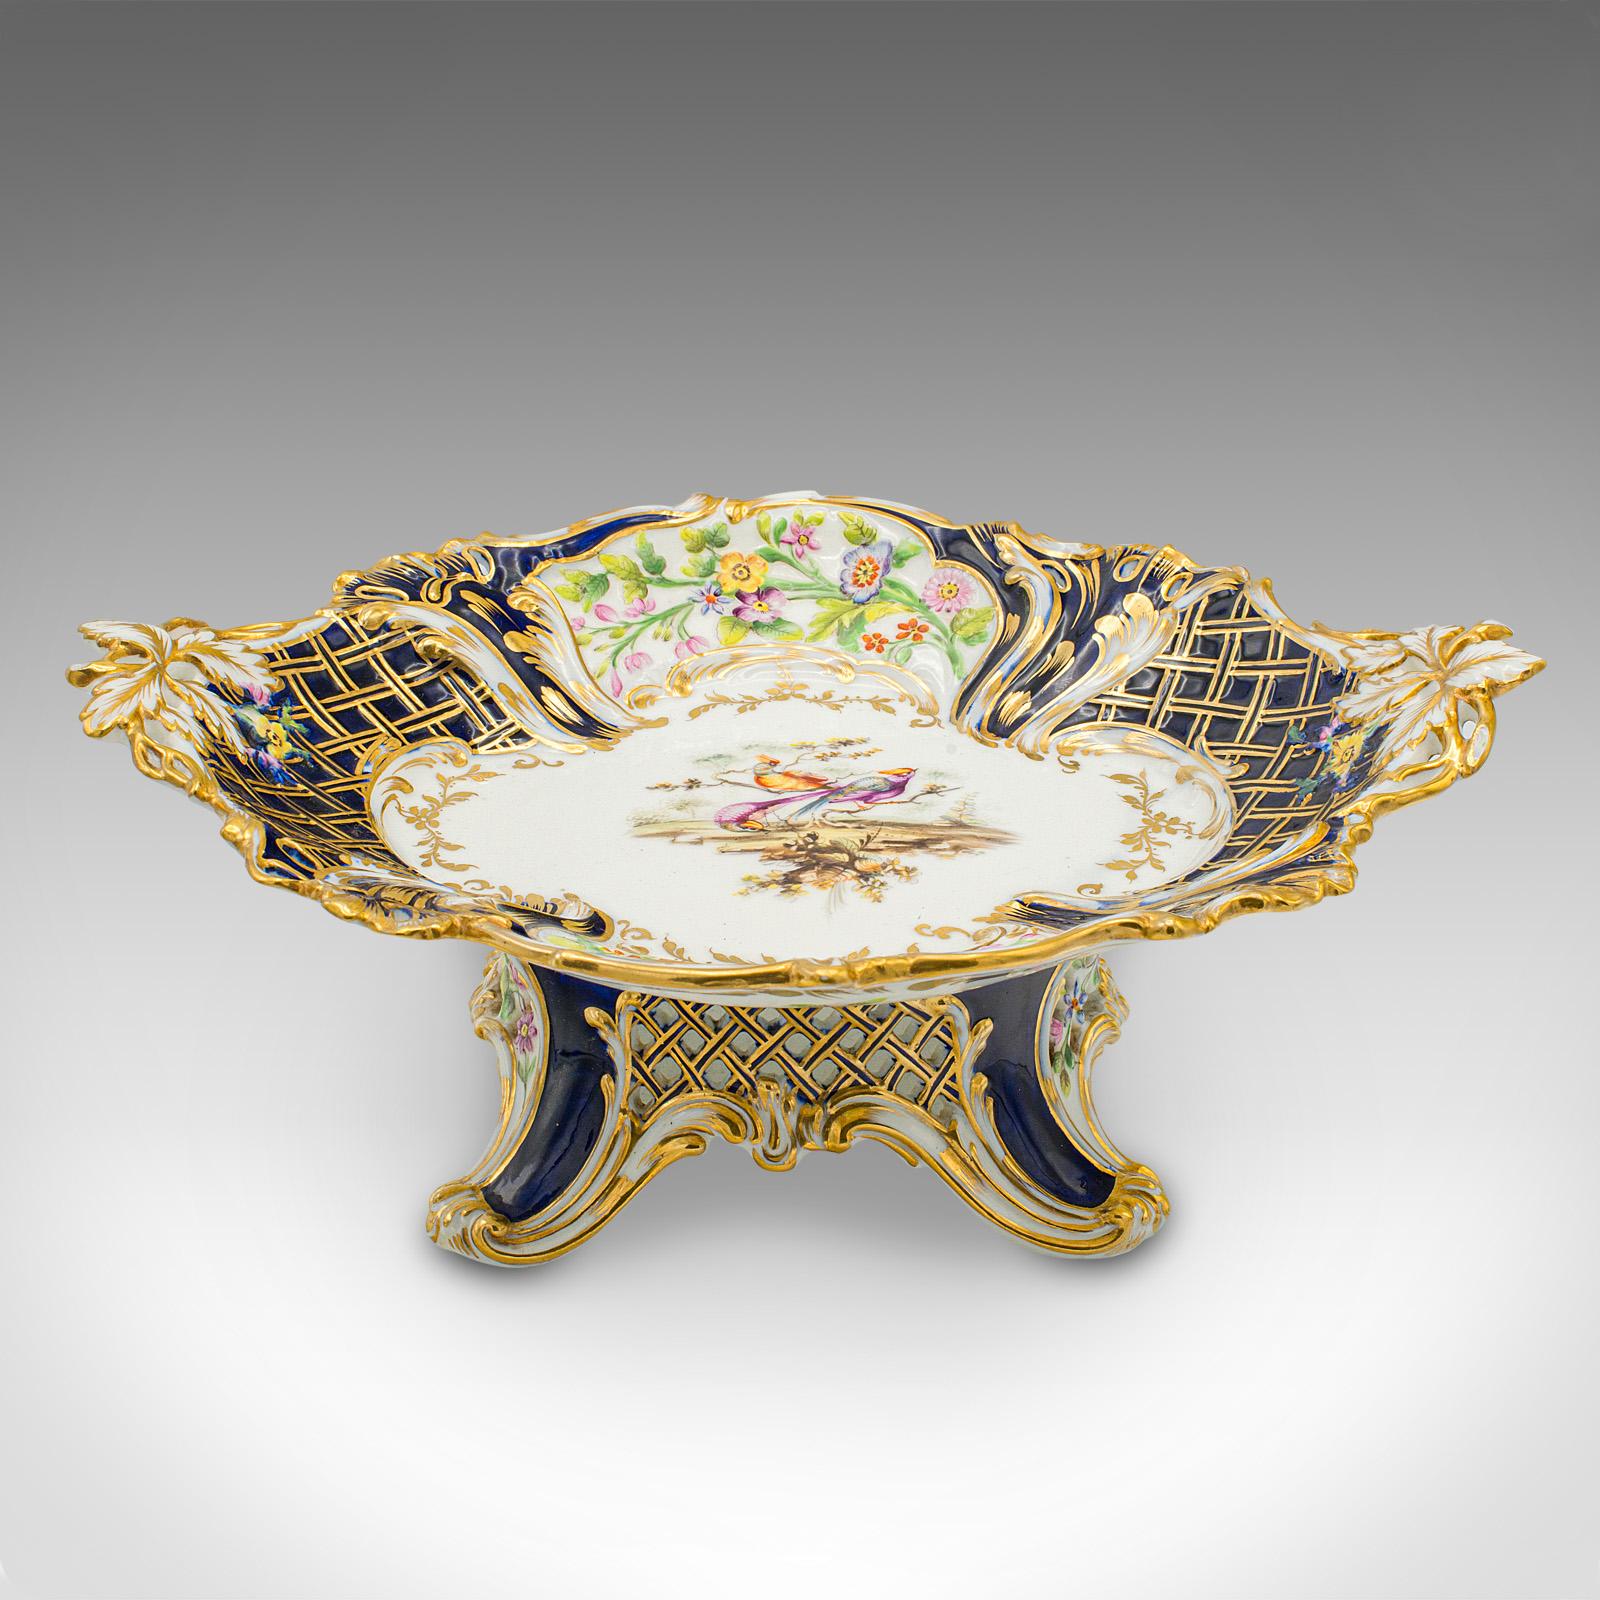 This is an antique decorative comport. An English, gilded ceramic serving dish, dating to the Edwardian period, circa 1910.

Attractive example of serving ware, with ornate detail and fine colour
Displays a desirable aged patina and in good